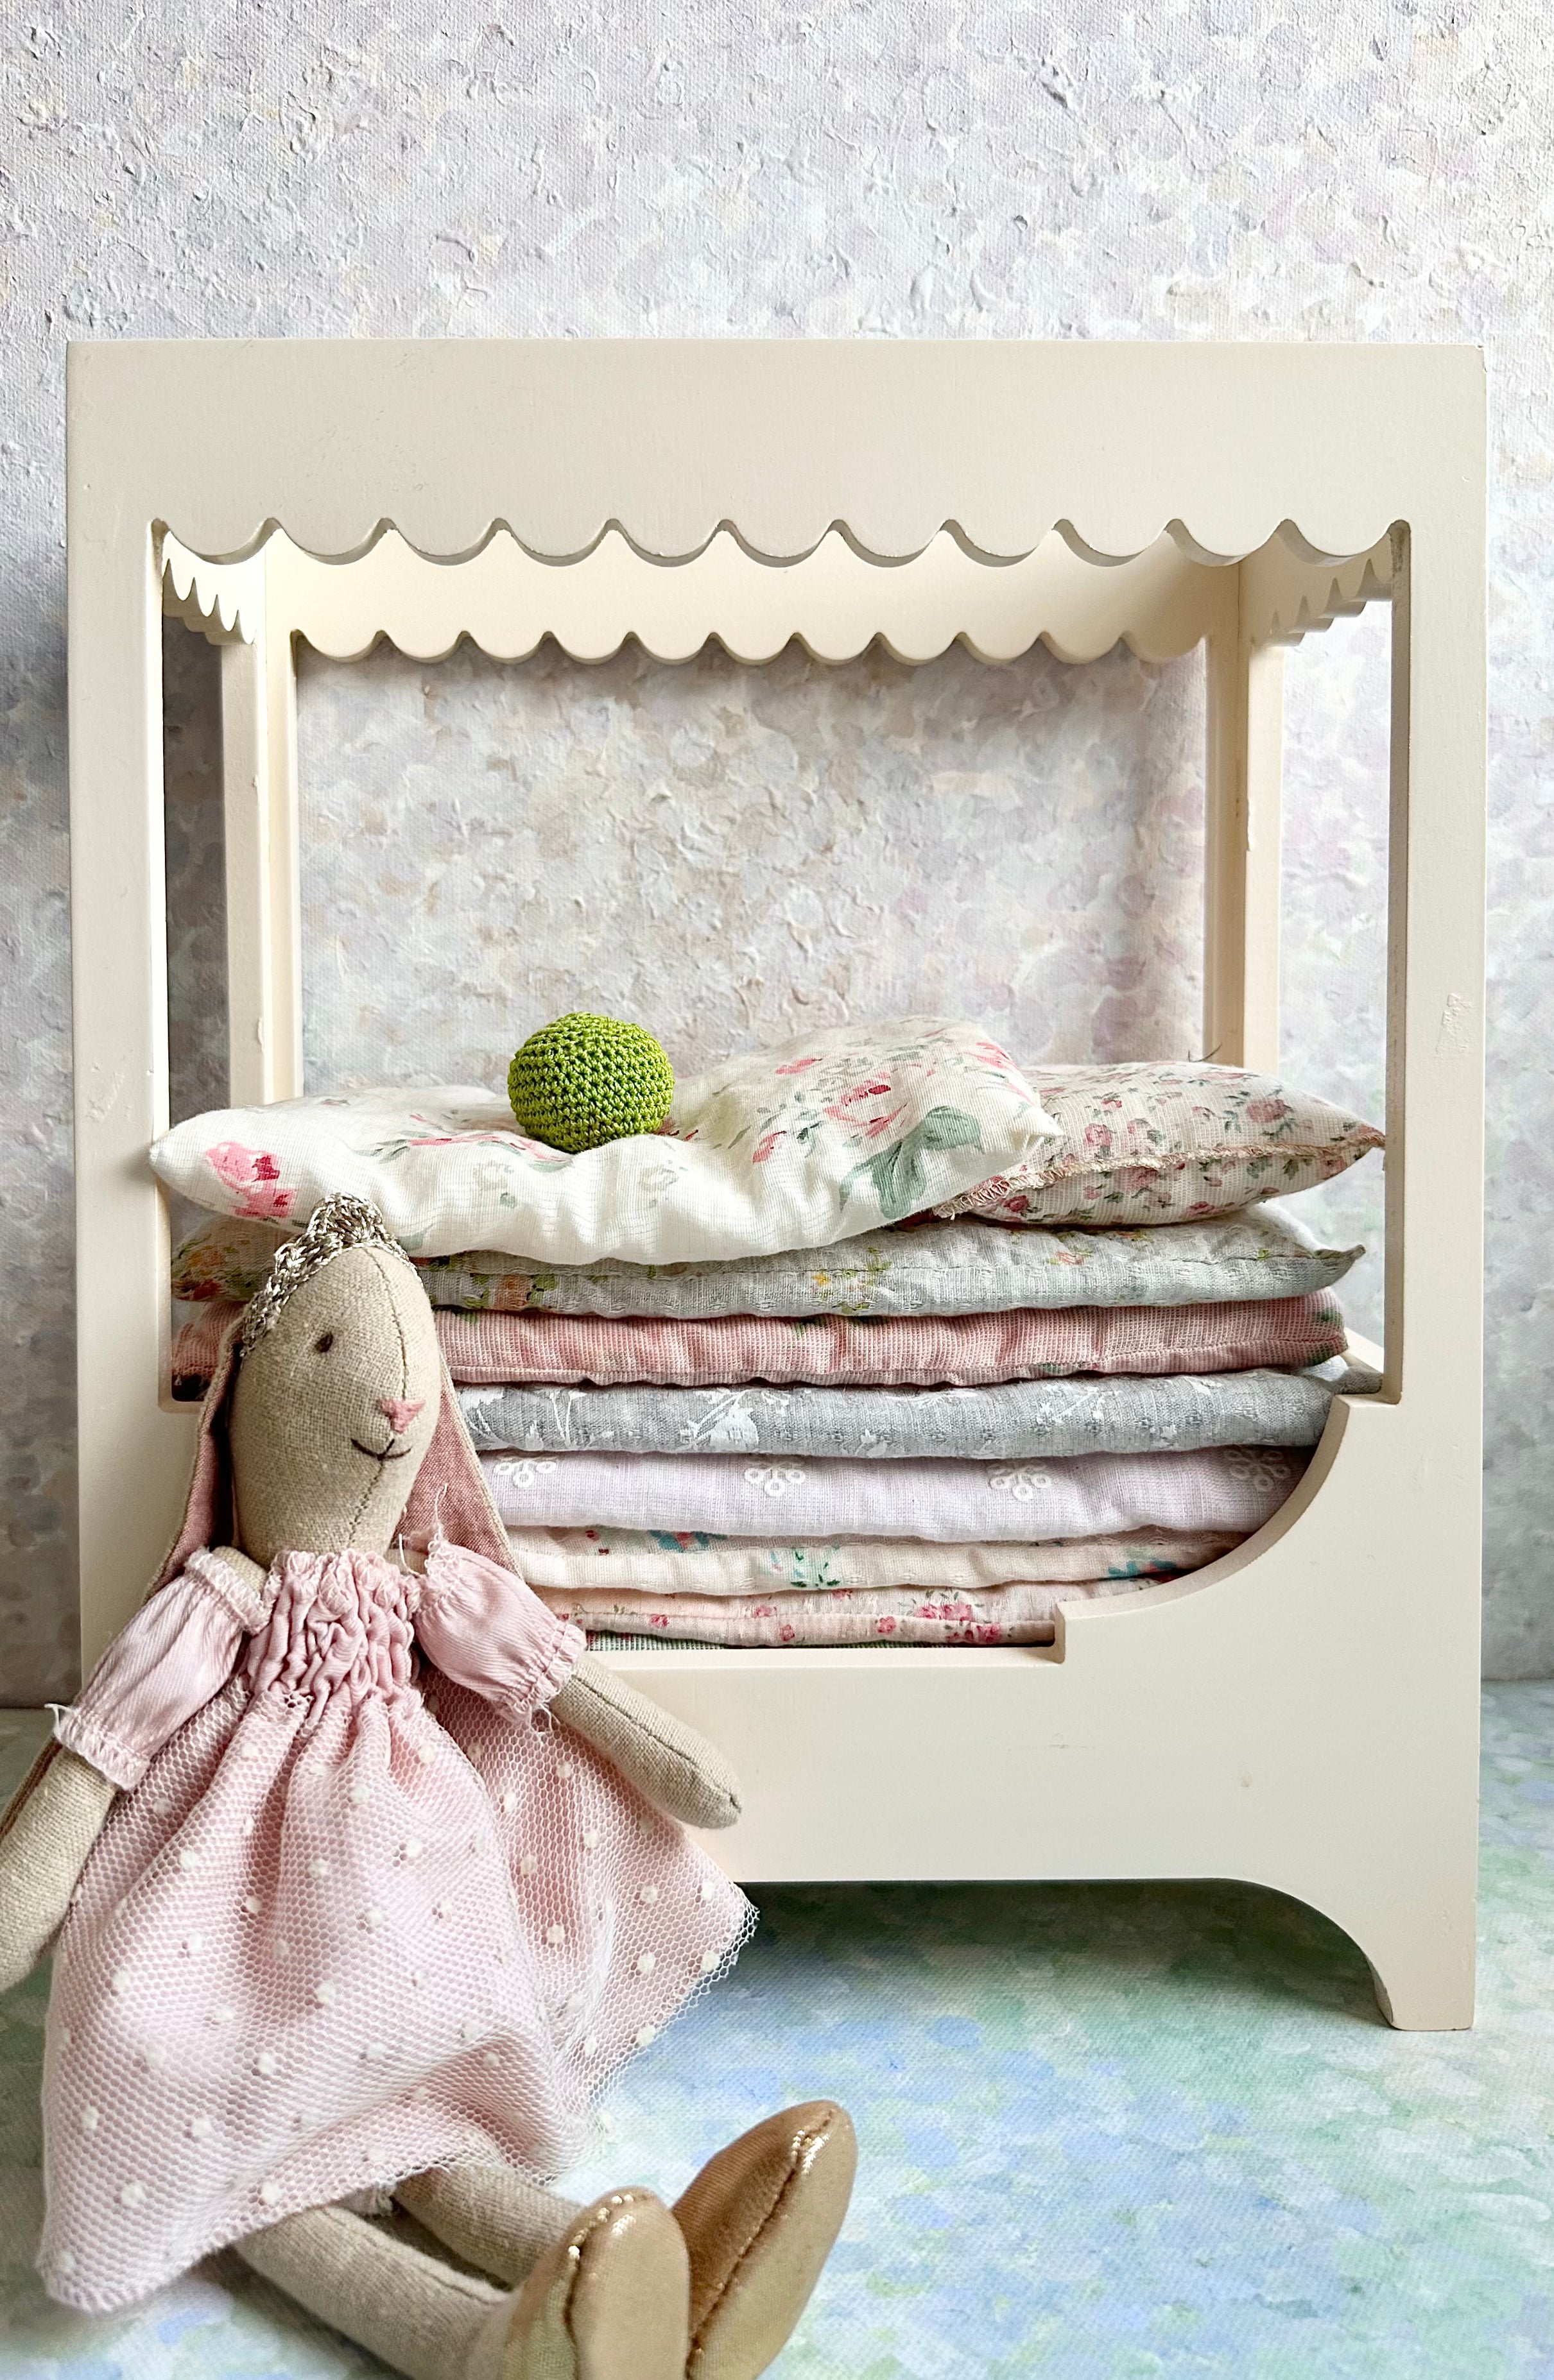 Bunny & the Pea - Bed Set